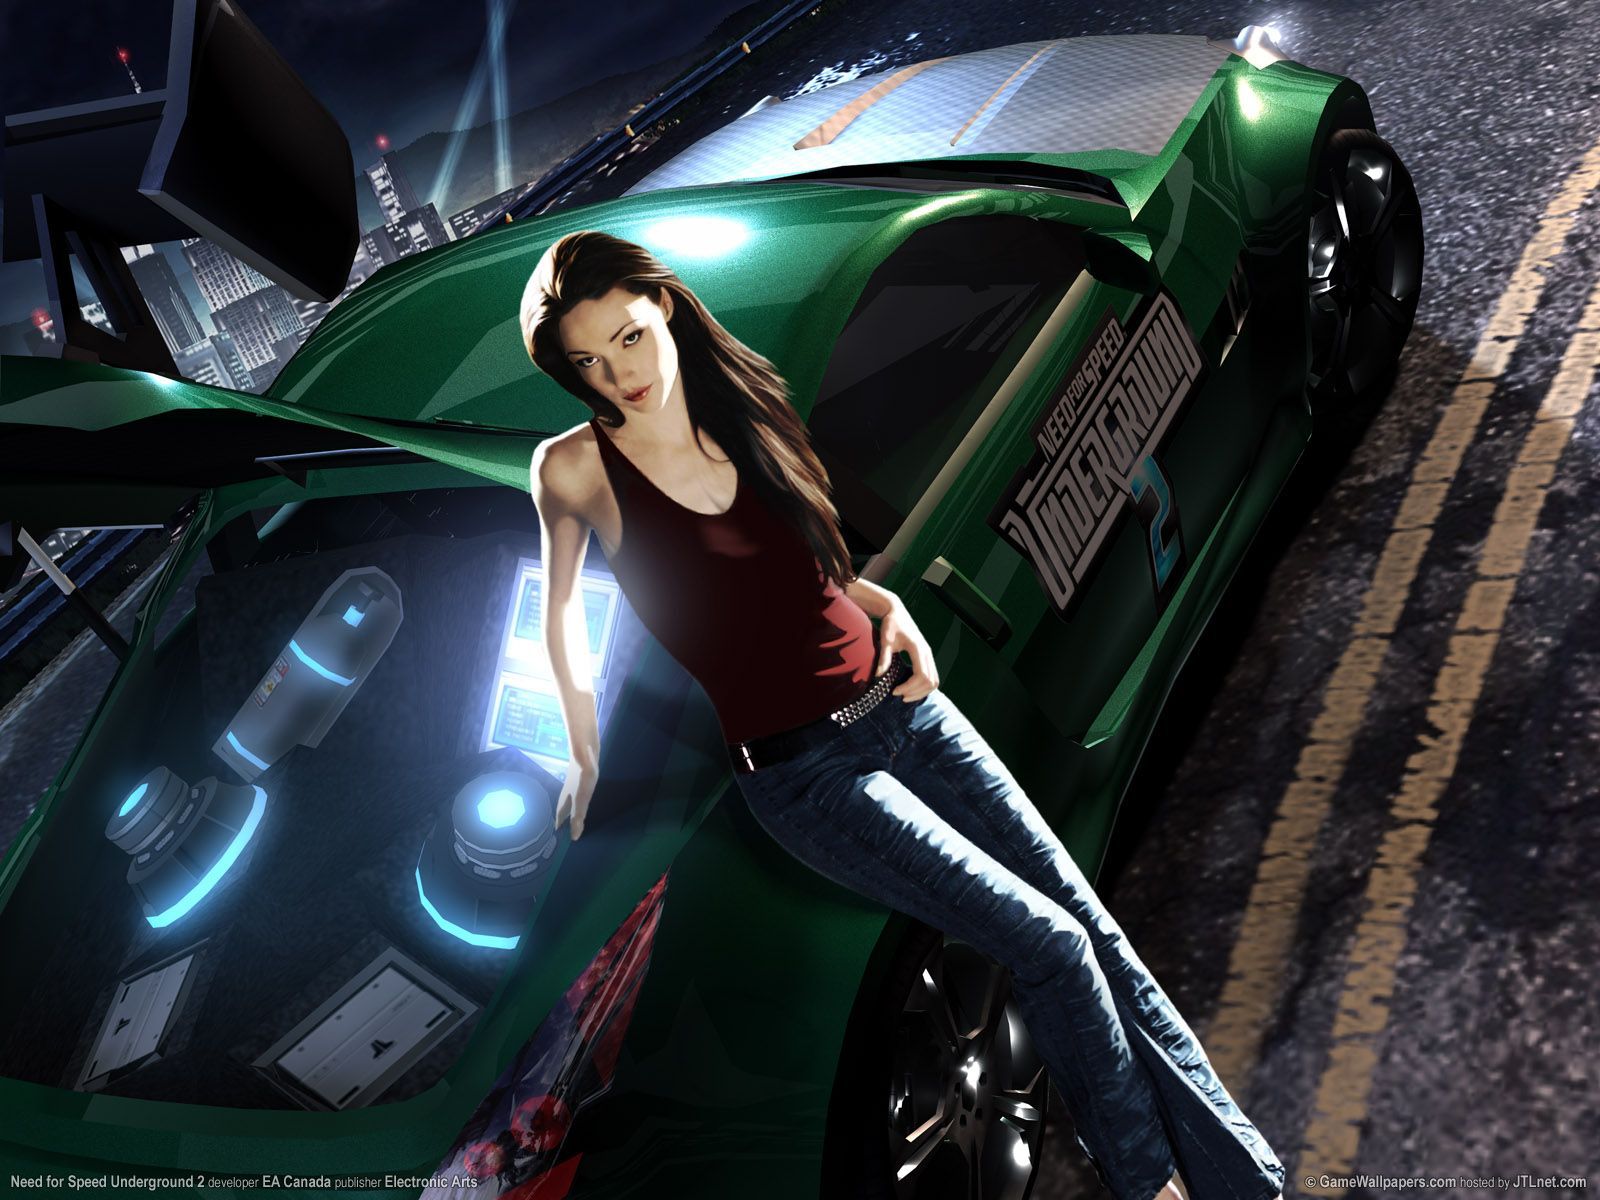 Need For Speed HD Girl Wallpaper. Need for speed, Need for speed carbon, Need for speed movie